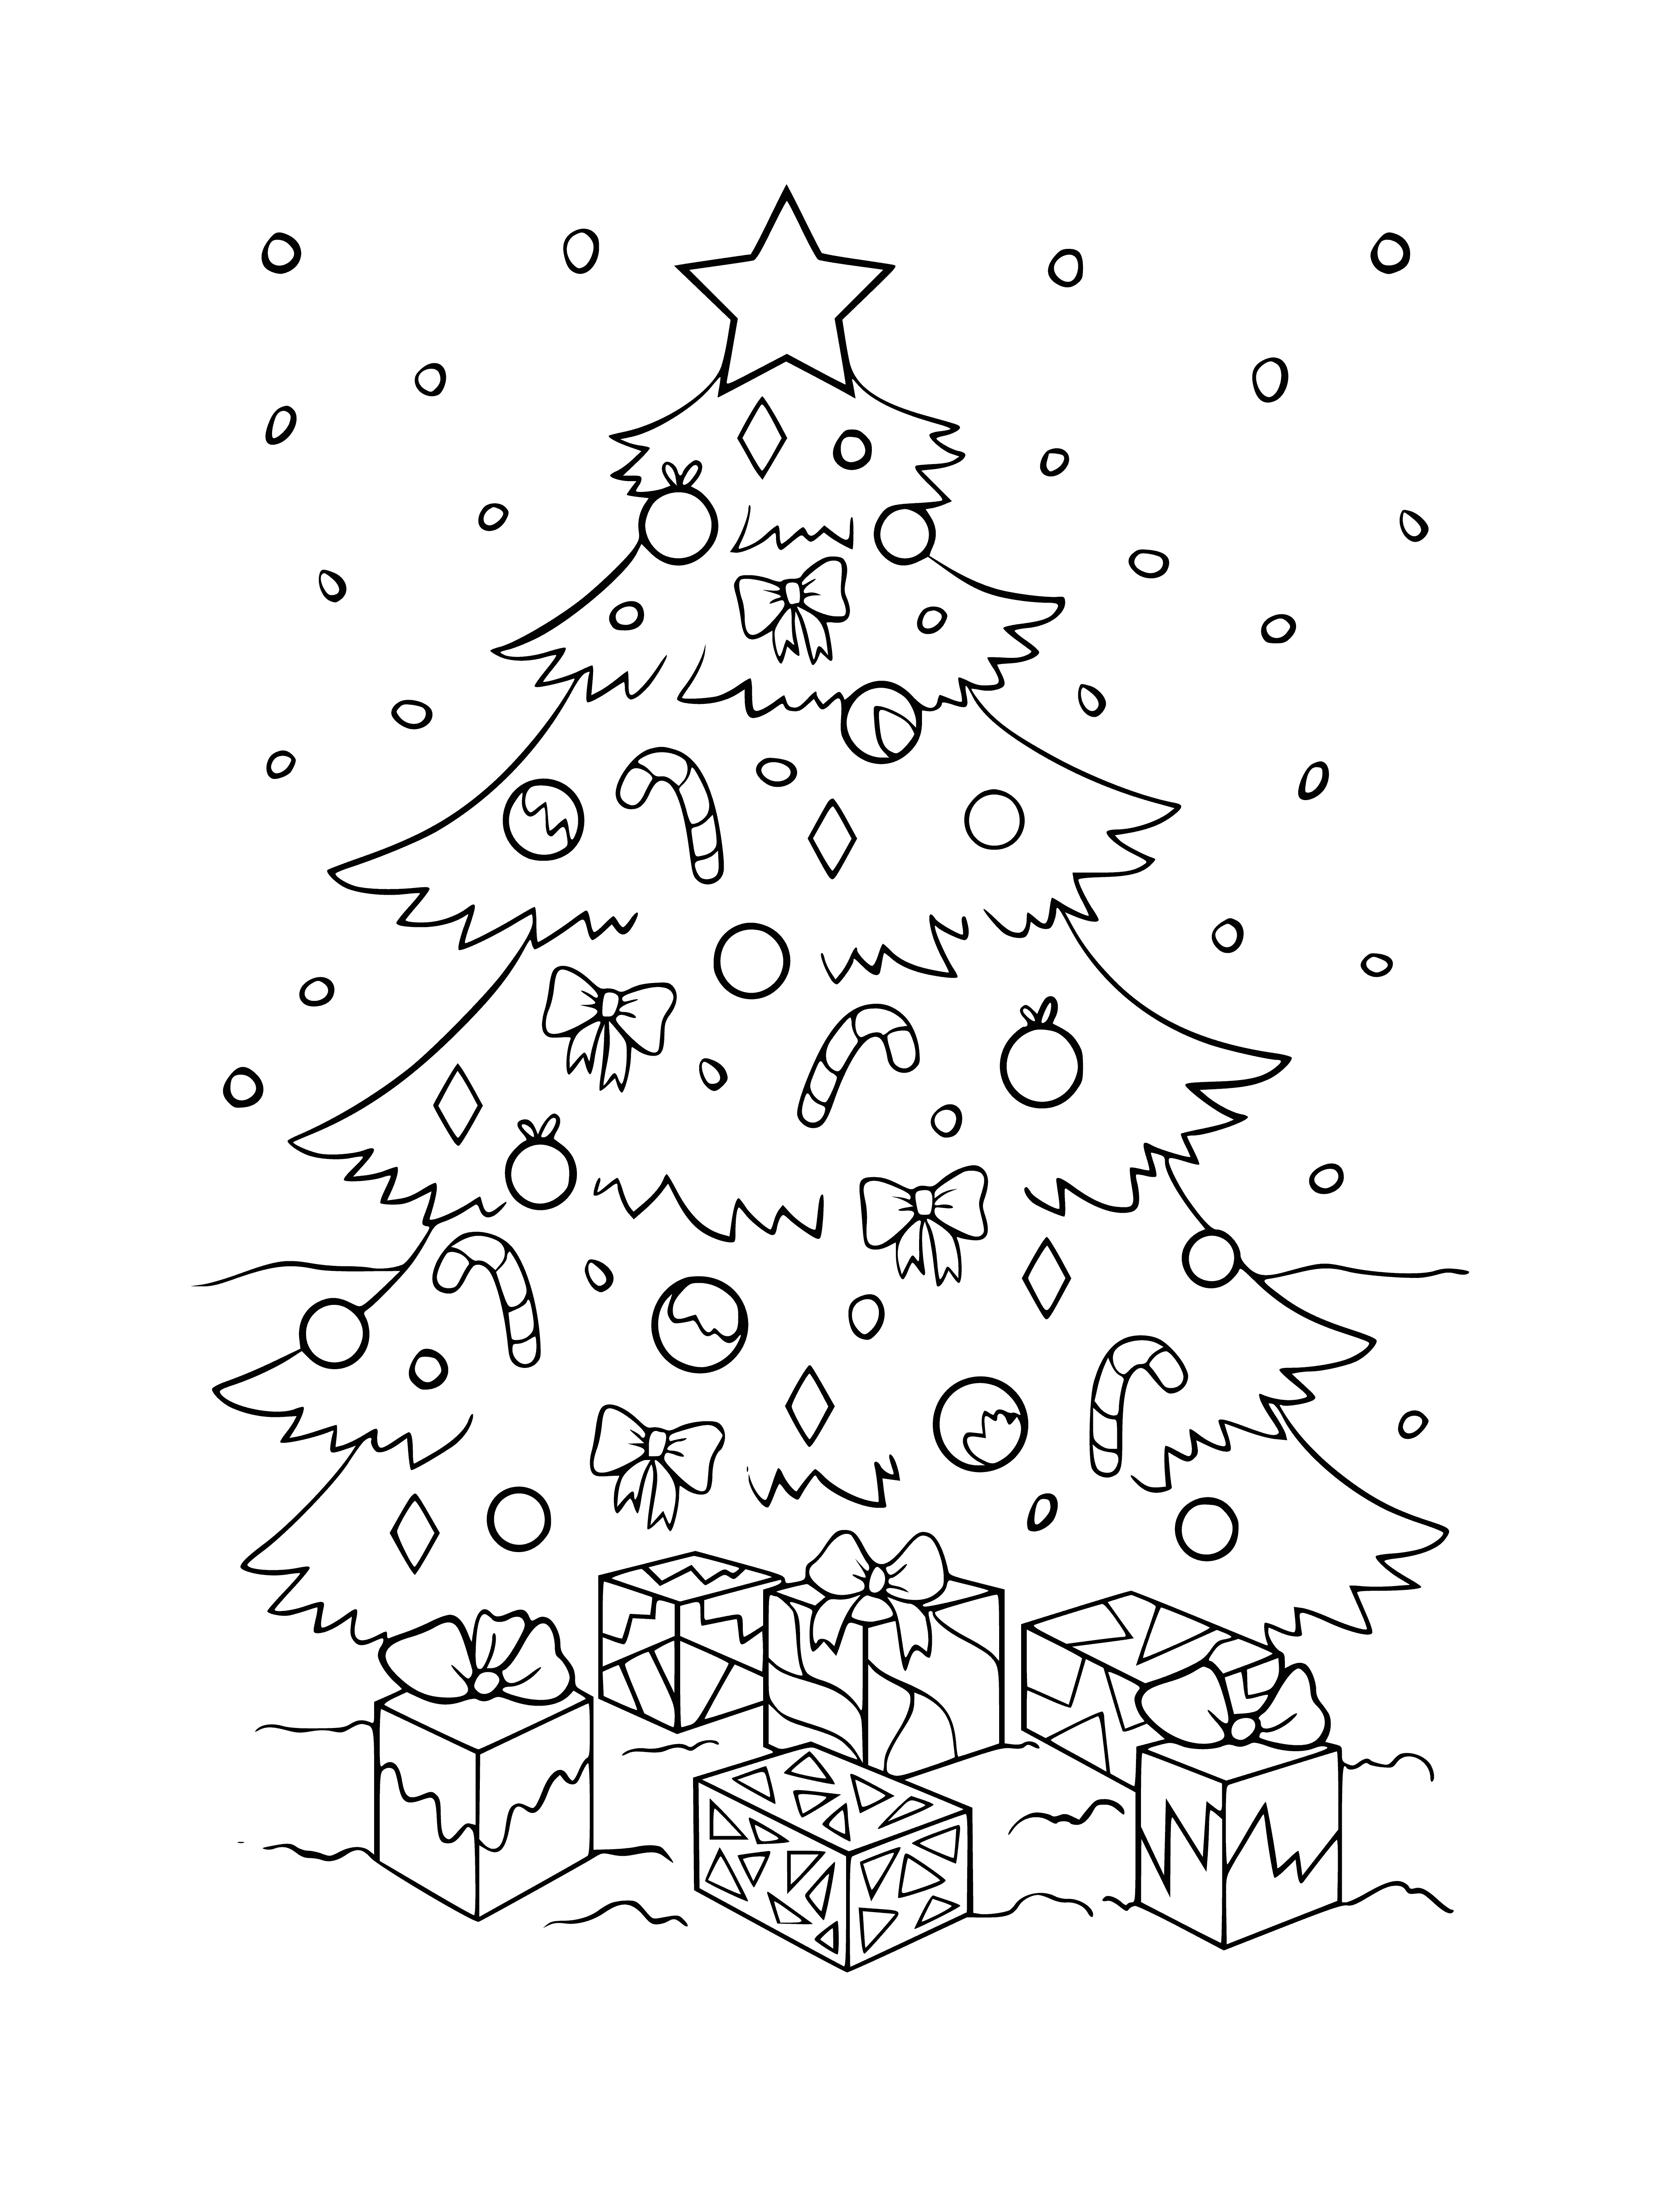 coloring page: A decorated Christmas tree with presents wrapped in colorful paper & bows underneath.